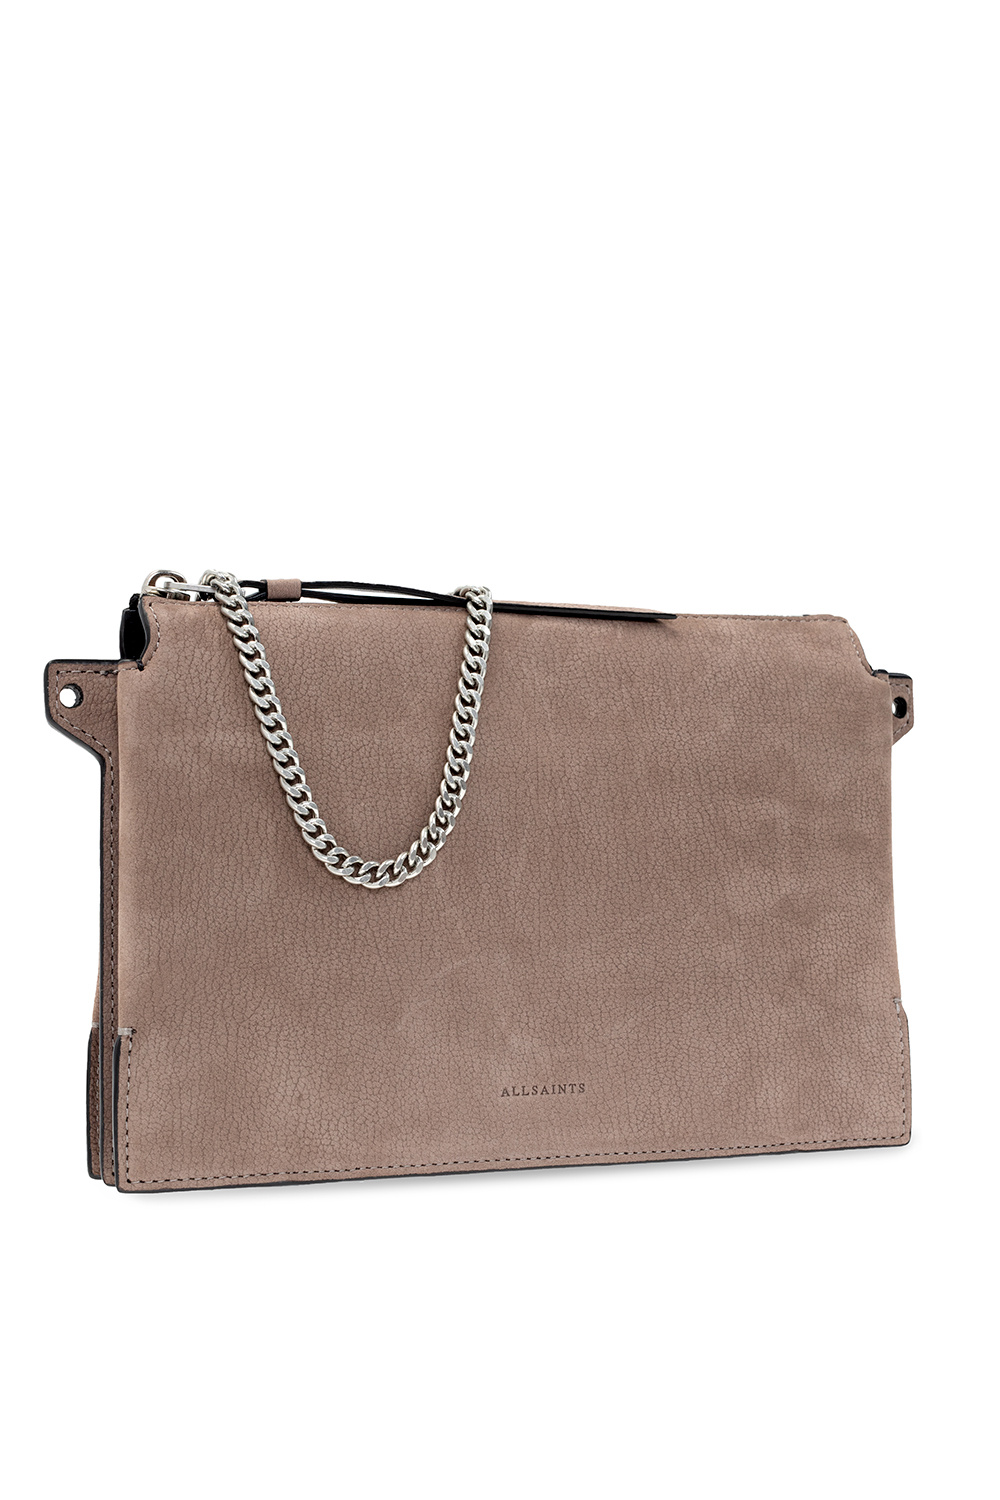 ALLSAINTS Suede/Leather Crossbody Bag, Taupe/Grey